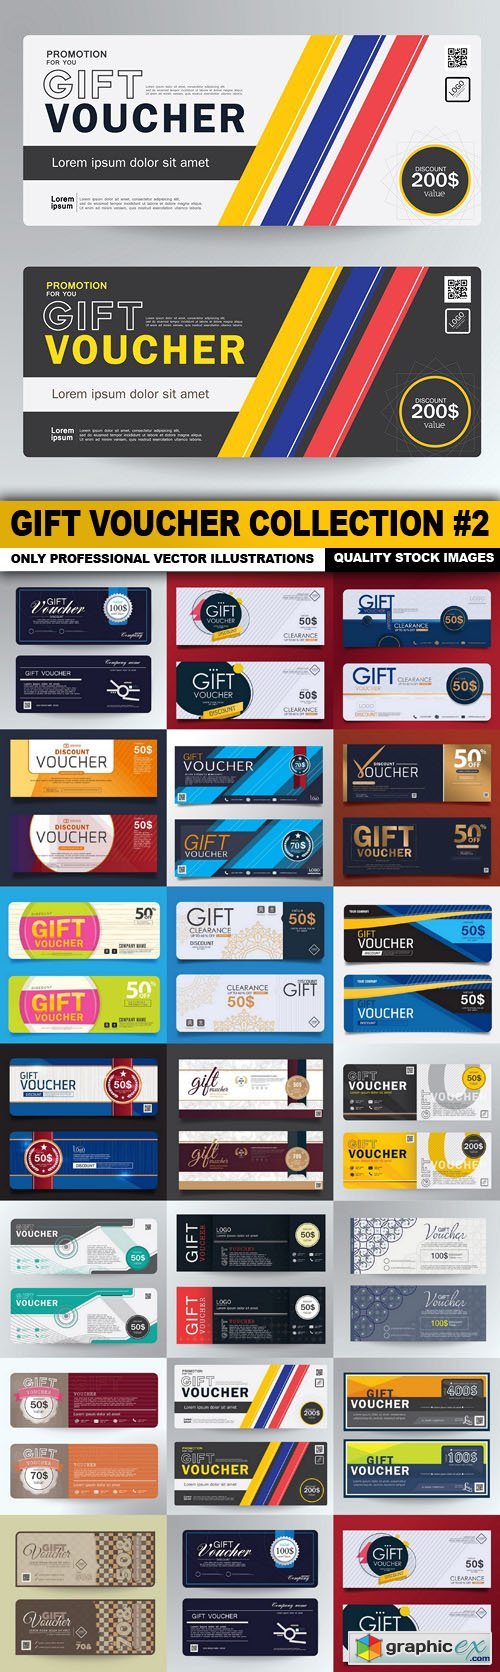 Gift Voucher Collection #2